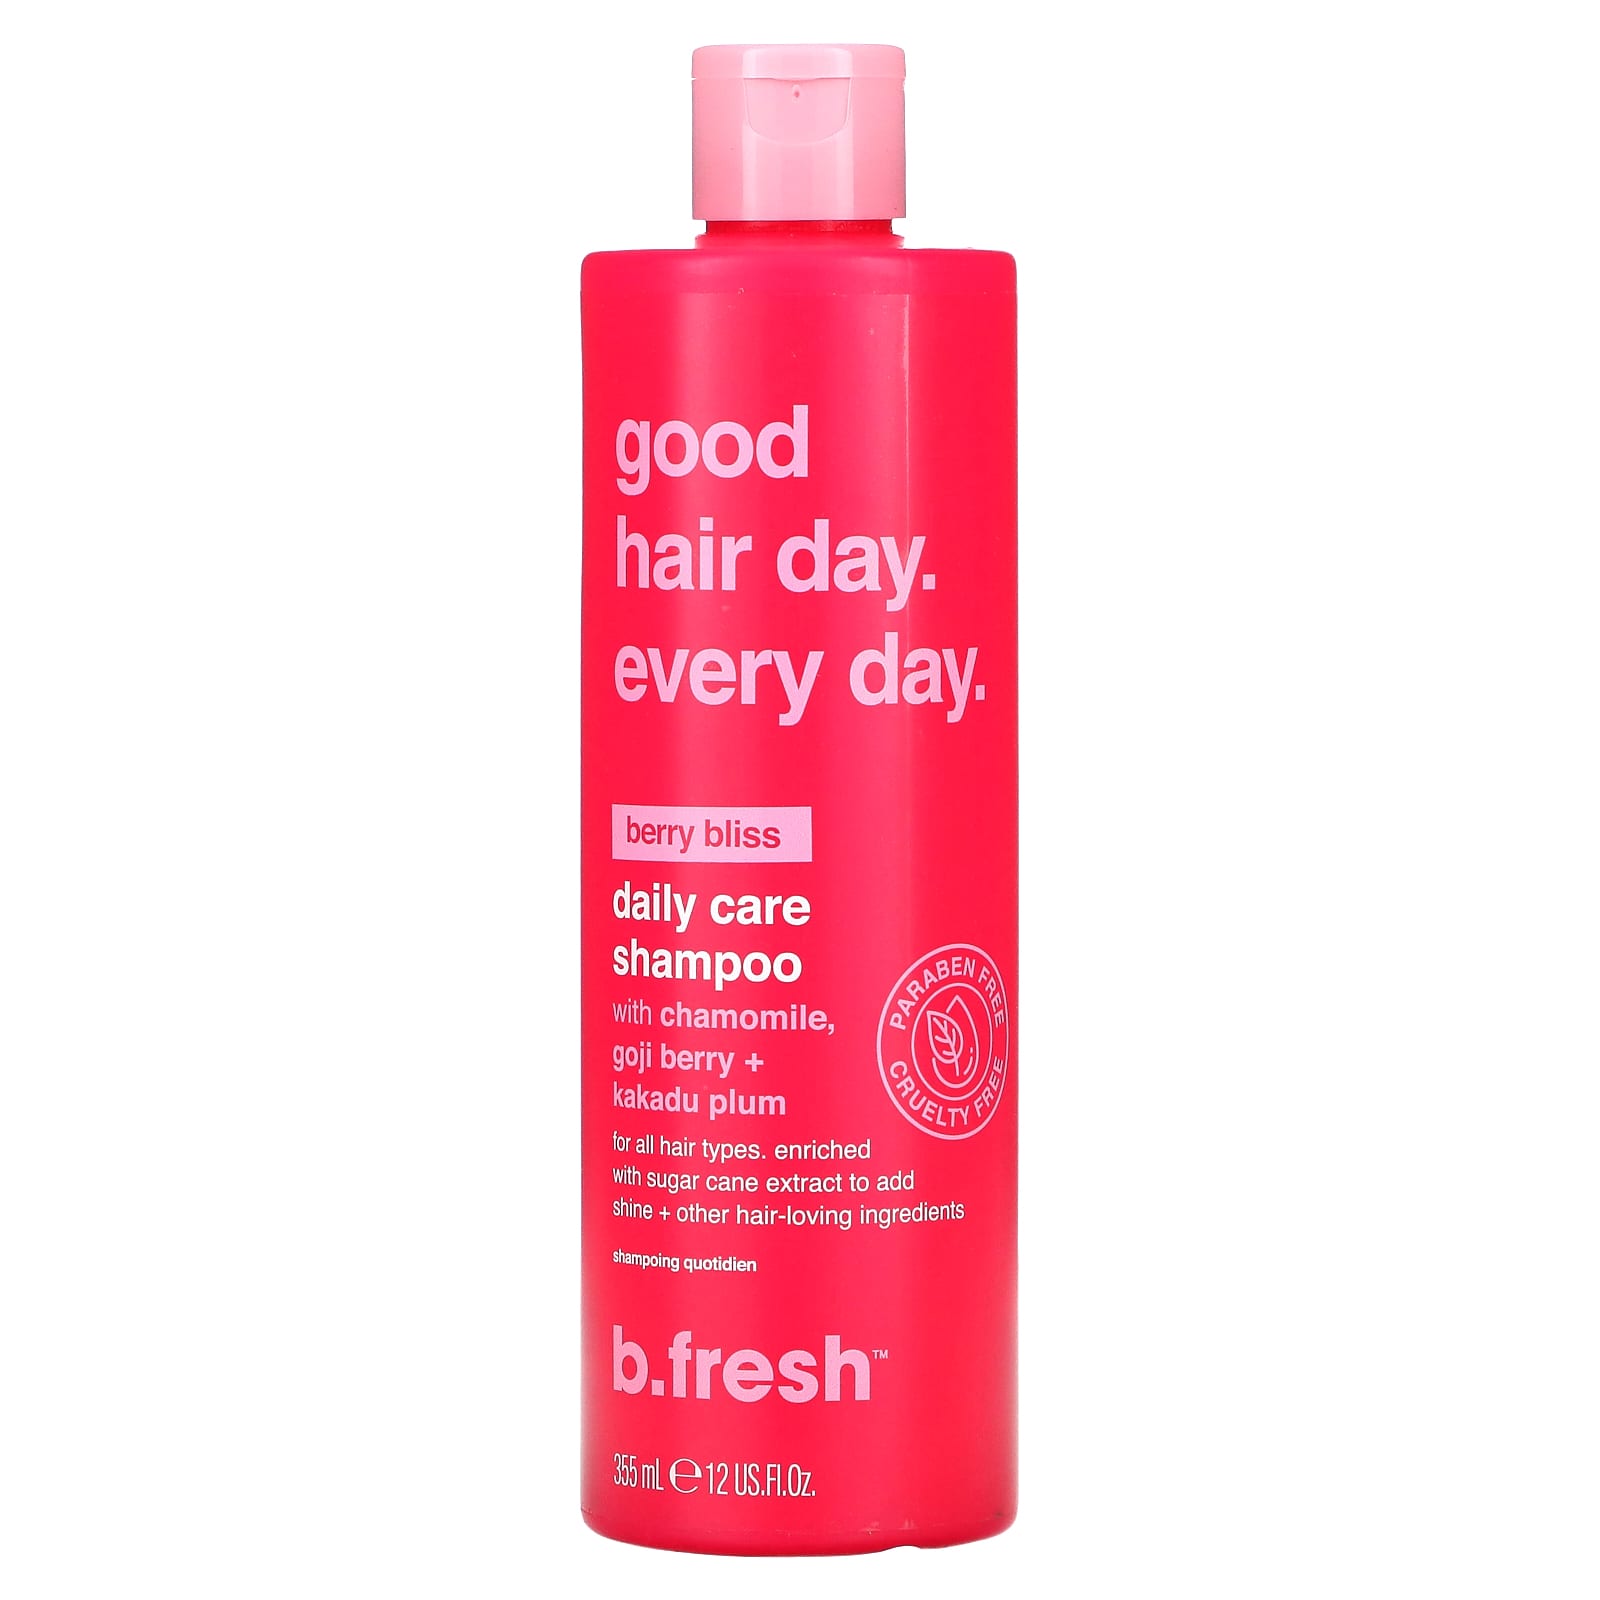 b.fresh, Good Hair Day Every Day, Daily Care Shampoo, For All Hair